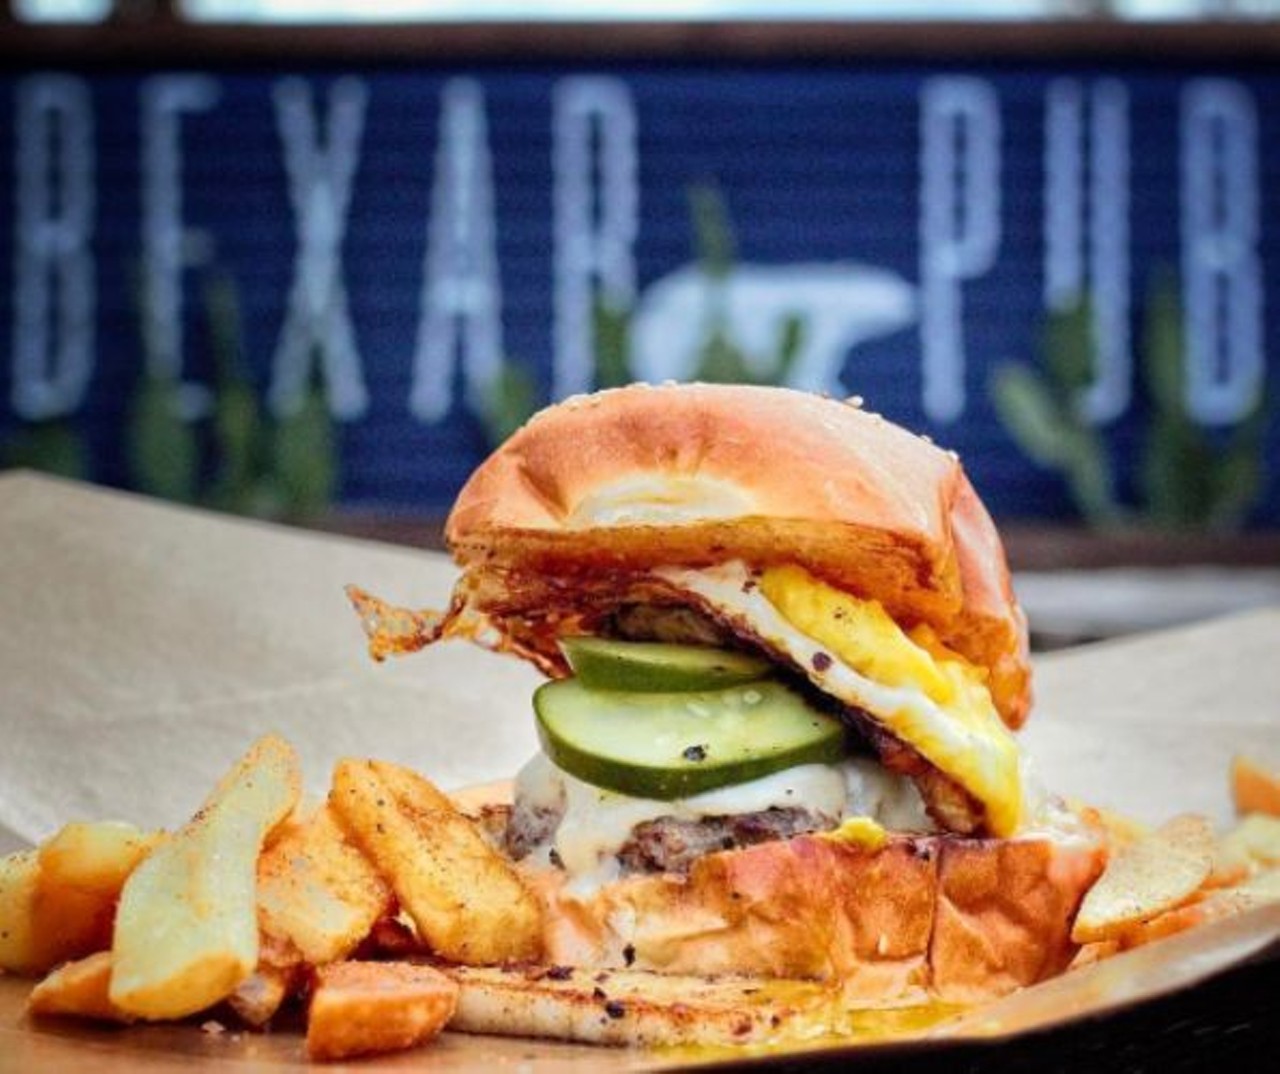 Burger at Bexar Pub
114 Brooklyn Ave,  (210) 236-7828
The Folc Burger is back and it brought along some pals in the form of exquisite fried chicken, loaded fries and piles of nachos.
Photo via Instagram, jk32_oso